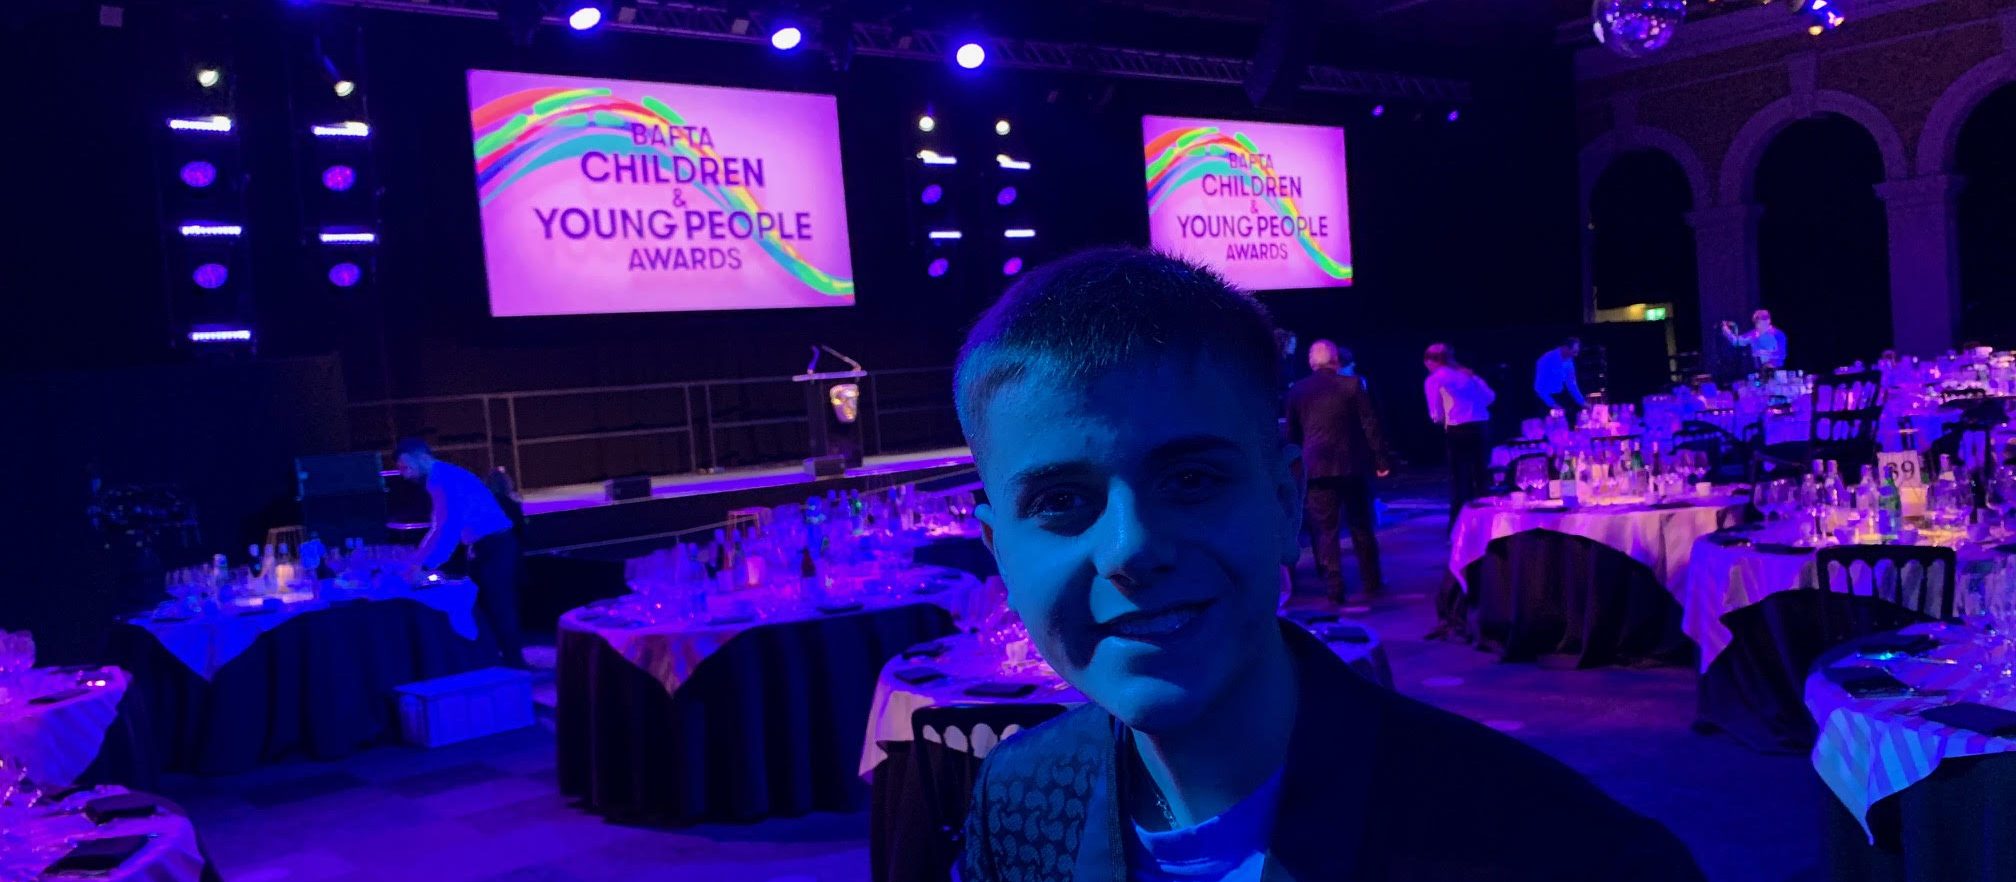 Con at the BAFTA Children & Young People Awards 2022